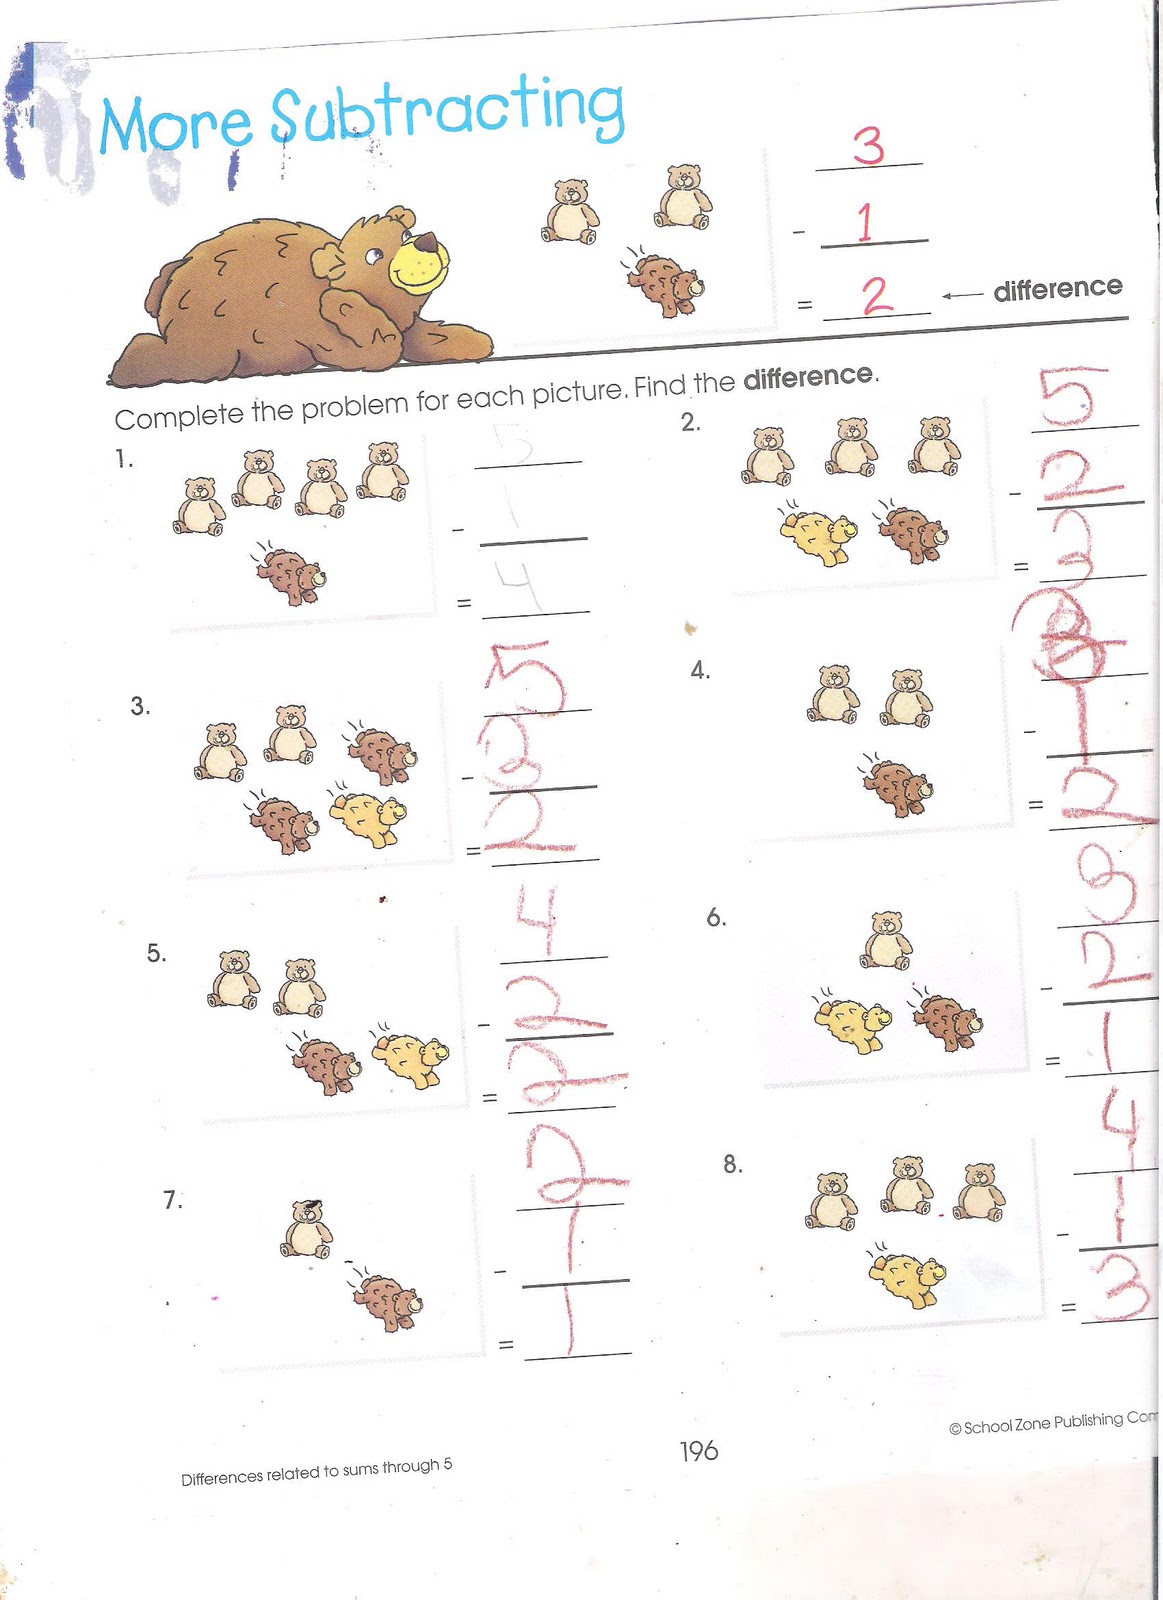 Independently Completed Worksheets Should Include Page Numbering